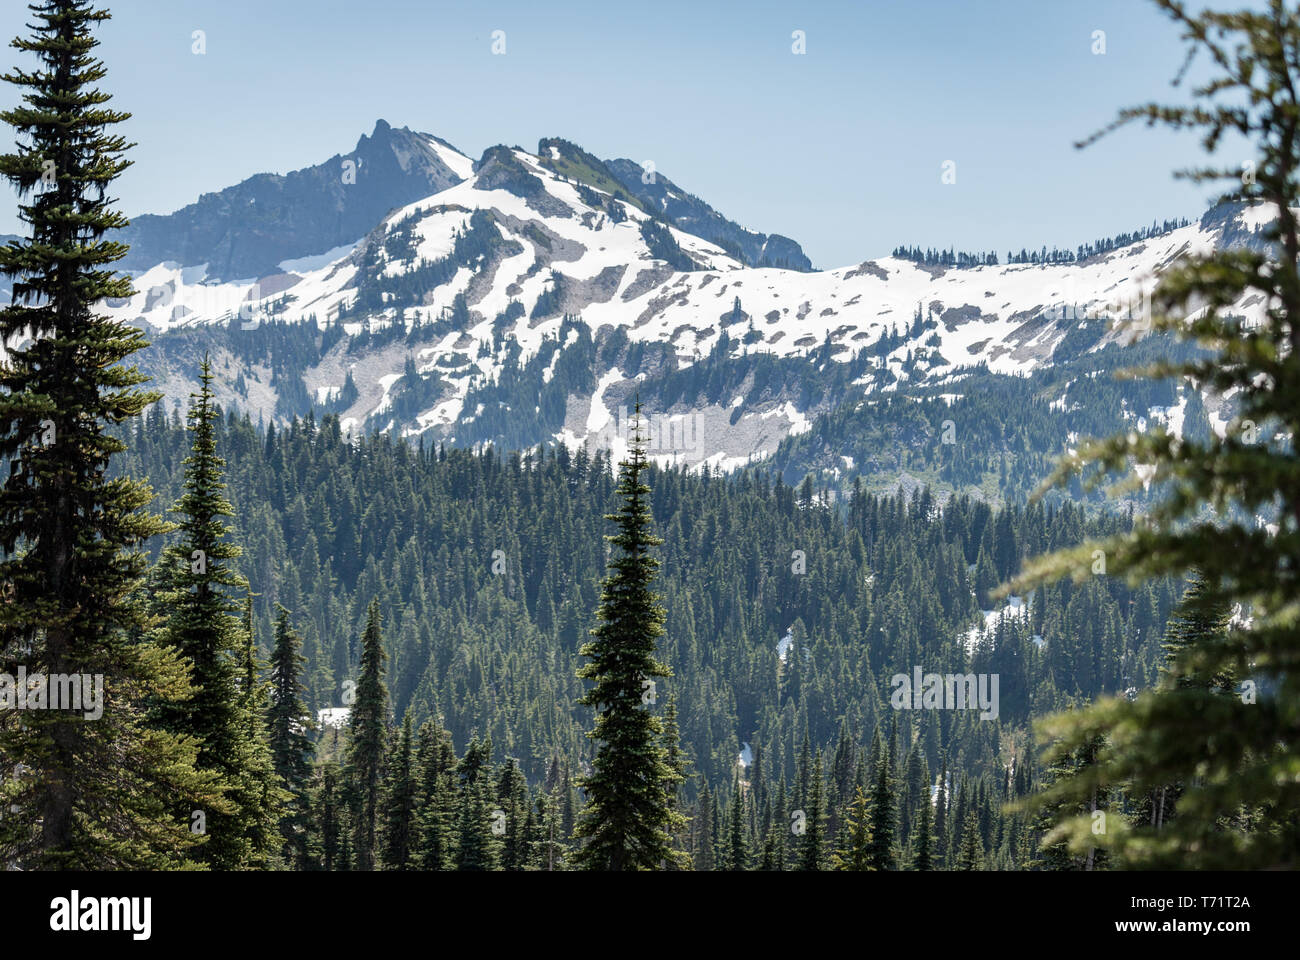 Evergreen trees grow large against mountain views in Mt Rainier National Park in Washington state. Stock Photo